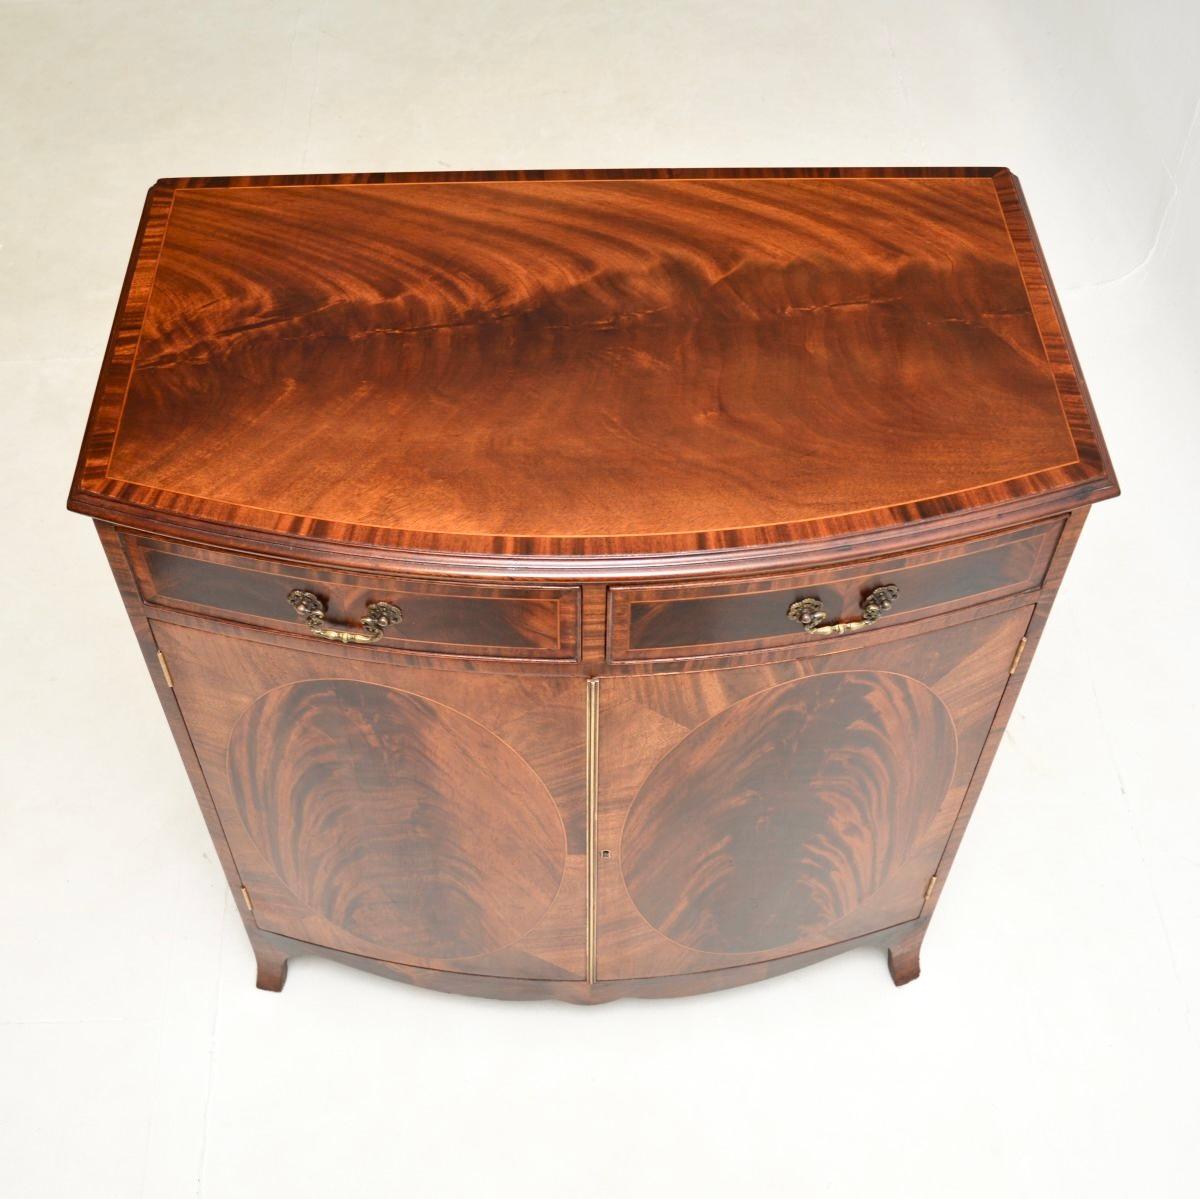 Wood Antique Edwardian Inlaid Cabinet For Sale